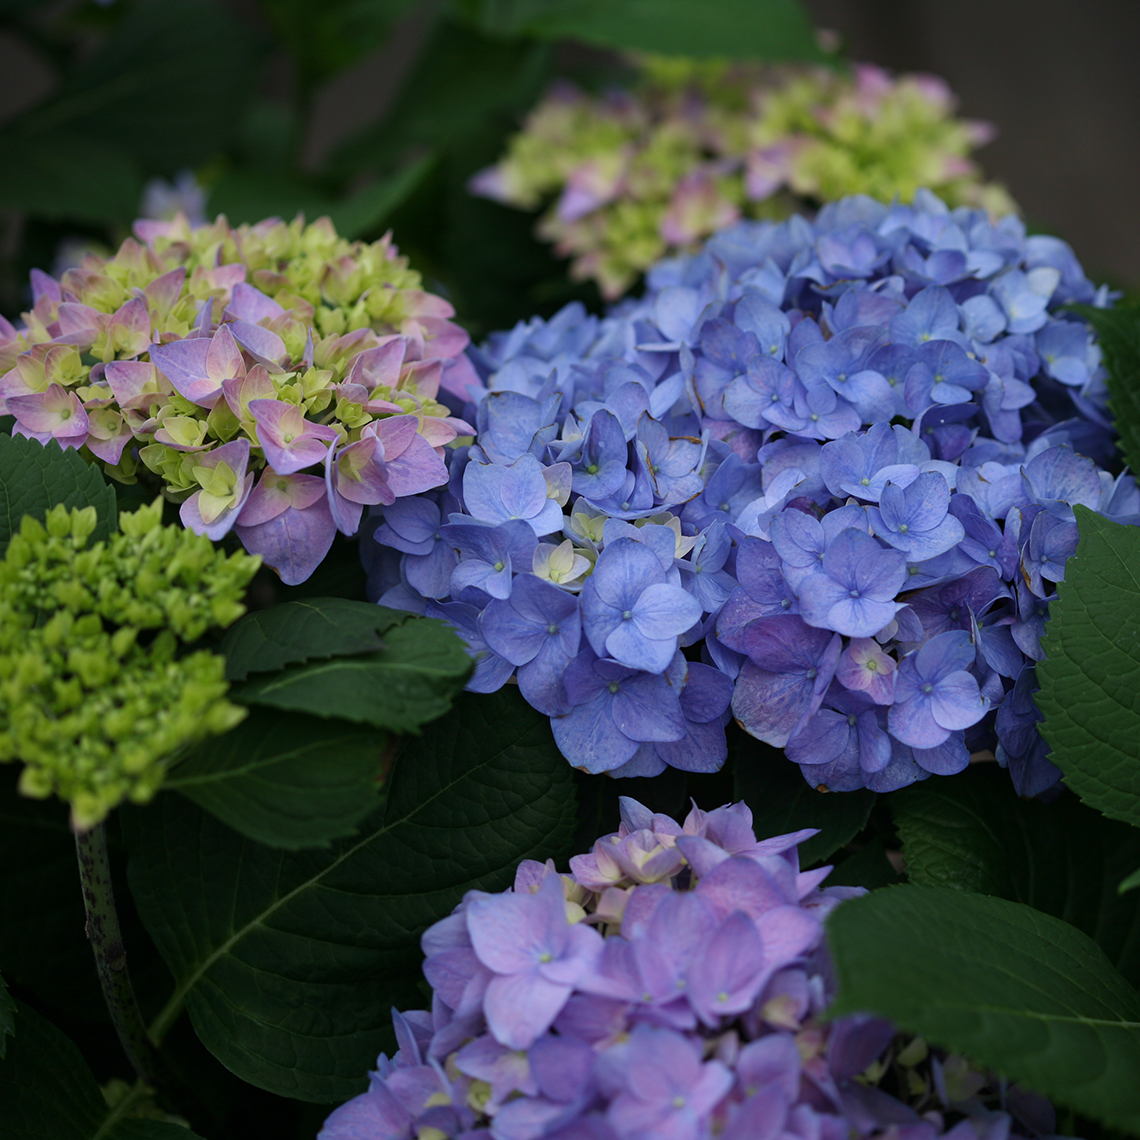 Closeup of the mophead flowers of Lets Dance Rhythmic Blue hydrangea showing the range of purple to blue colors it takes on